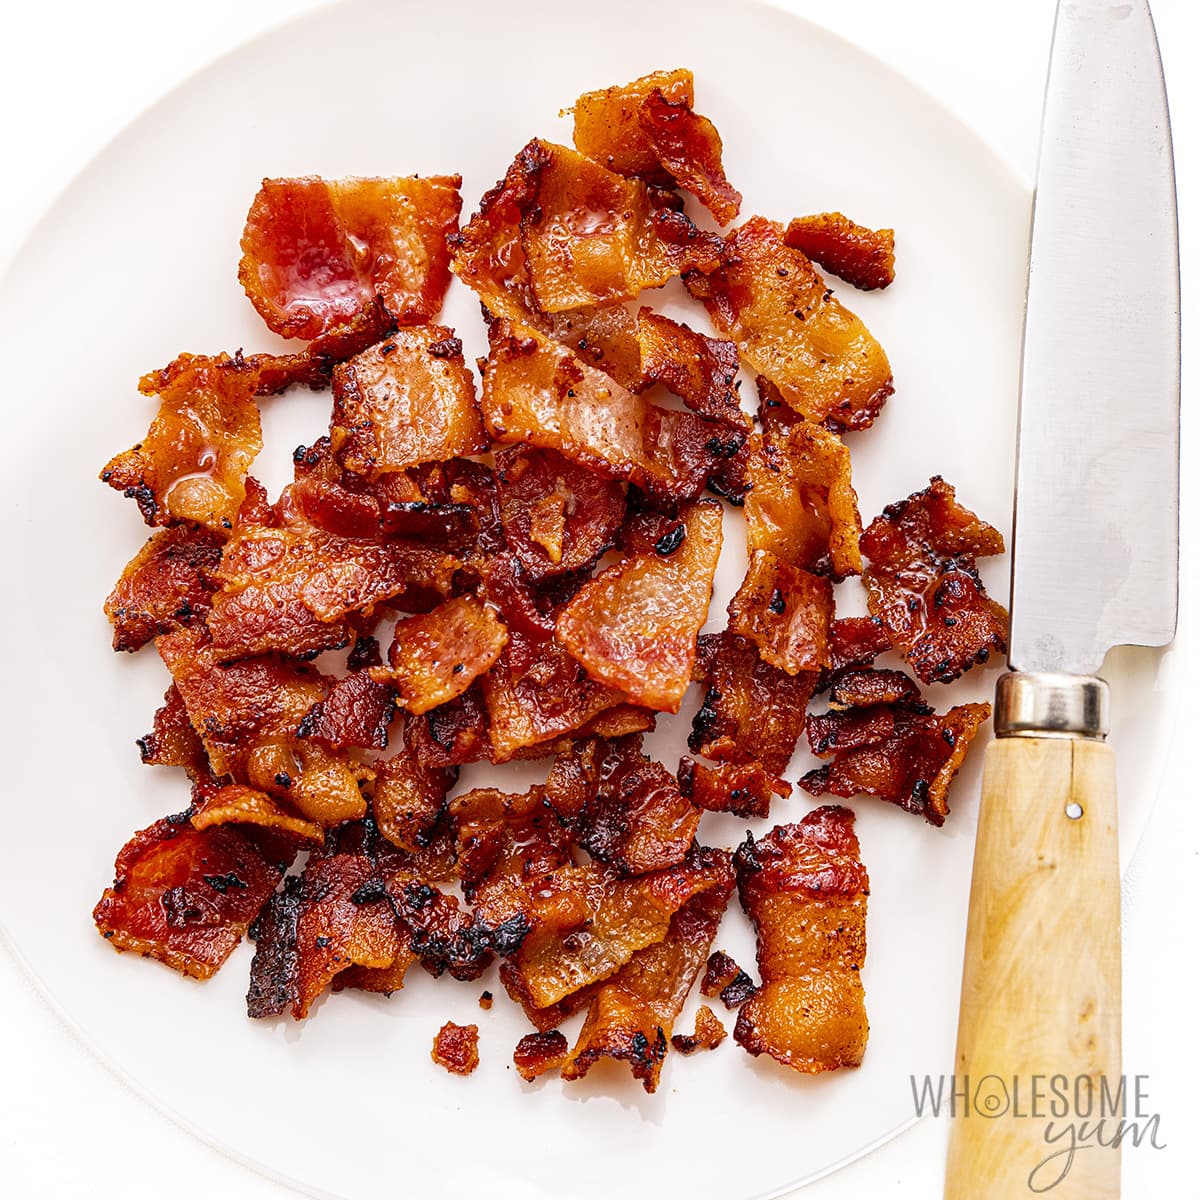 Bacon chopped into pieces on a plate.